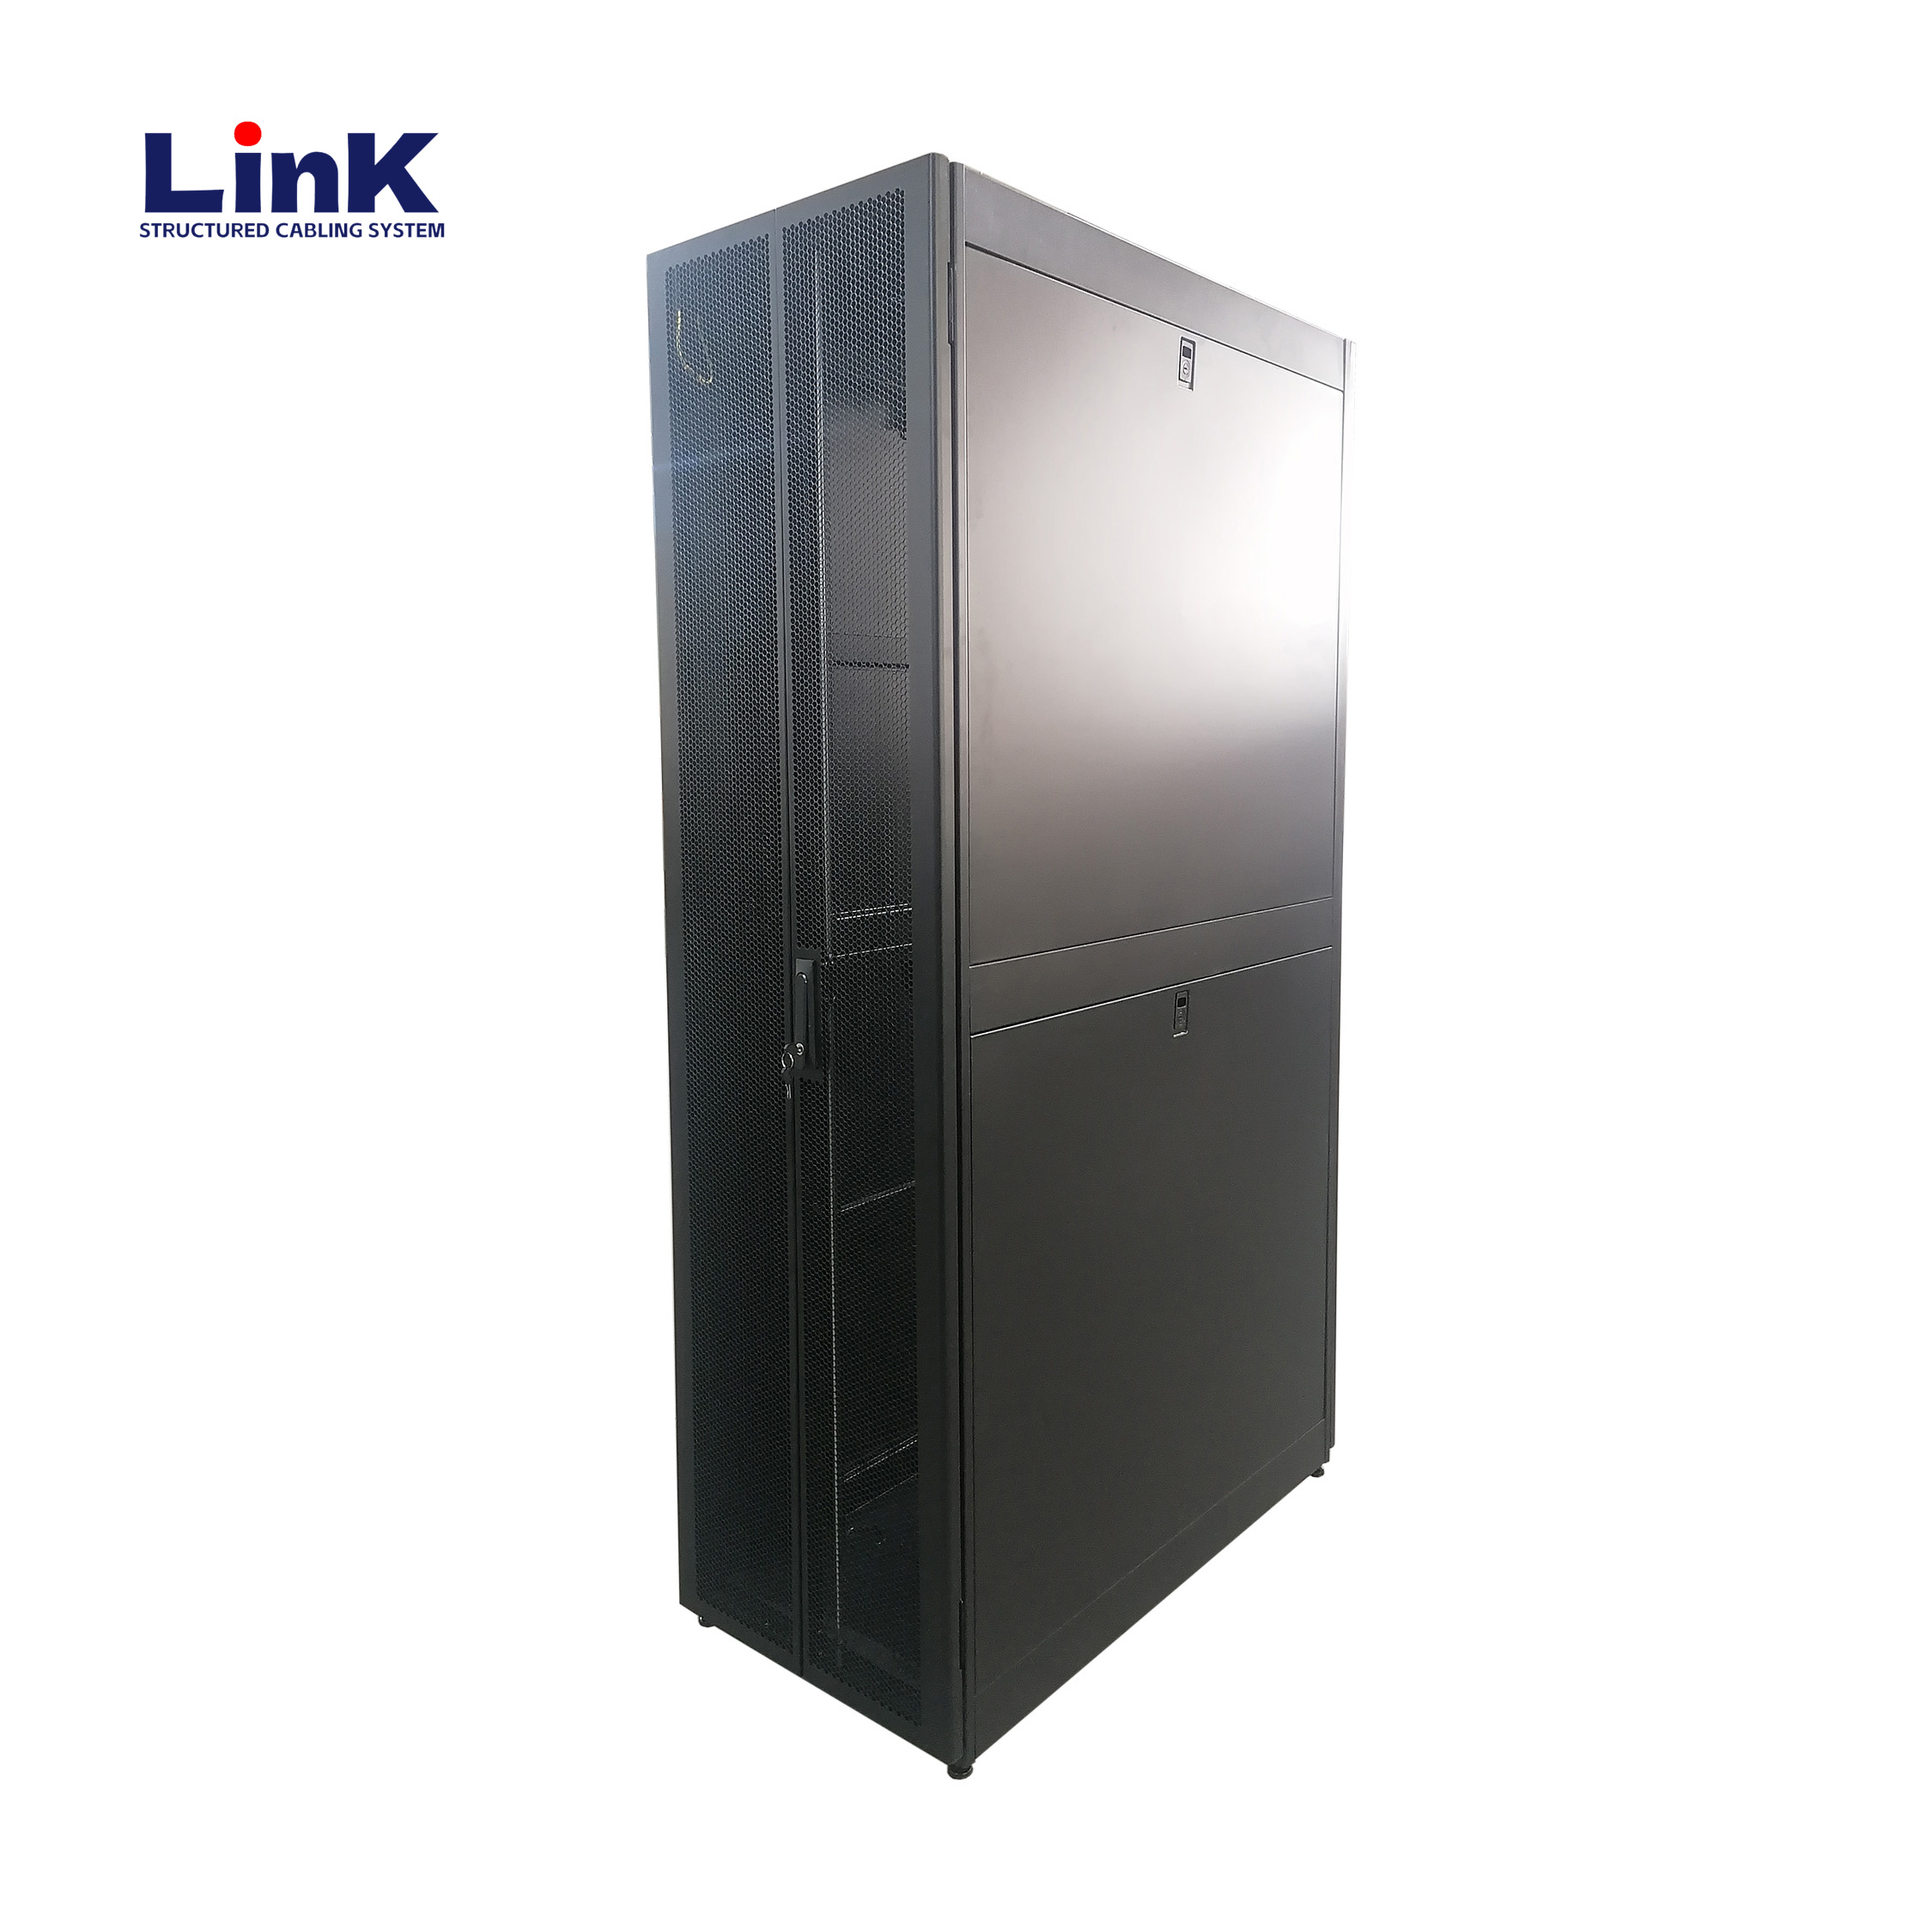 600x1000mm ISO Standing Server Rack for industrial